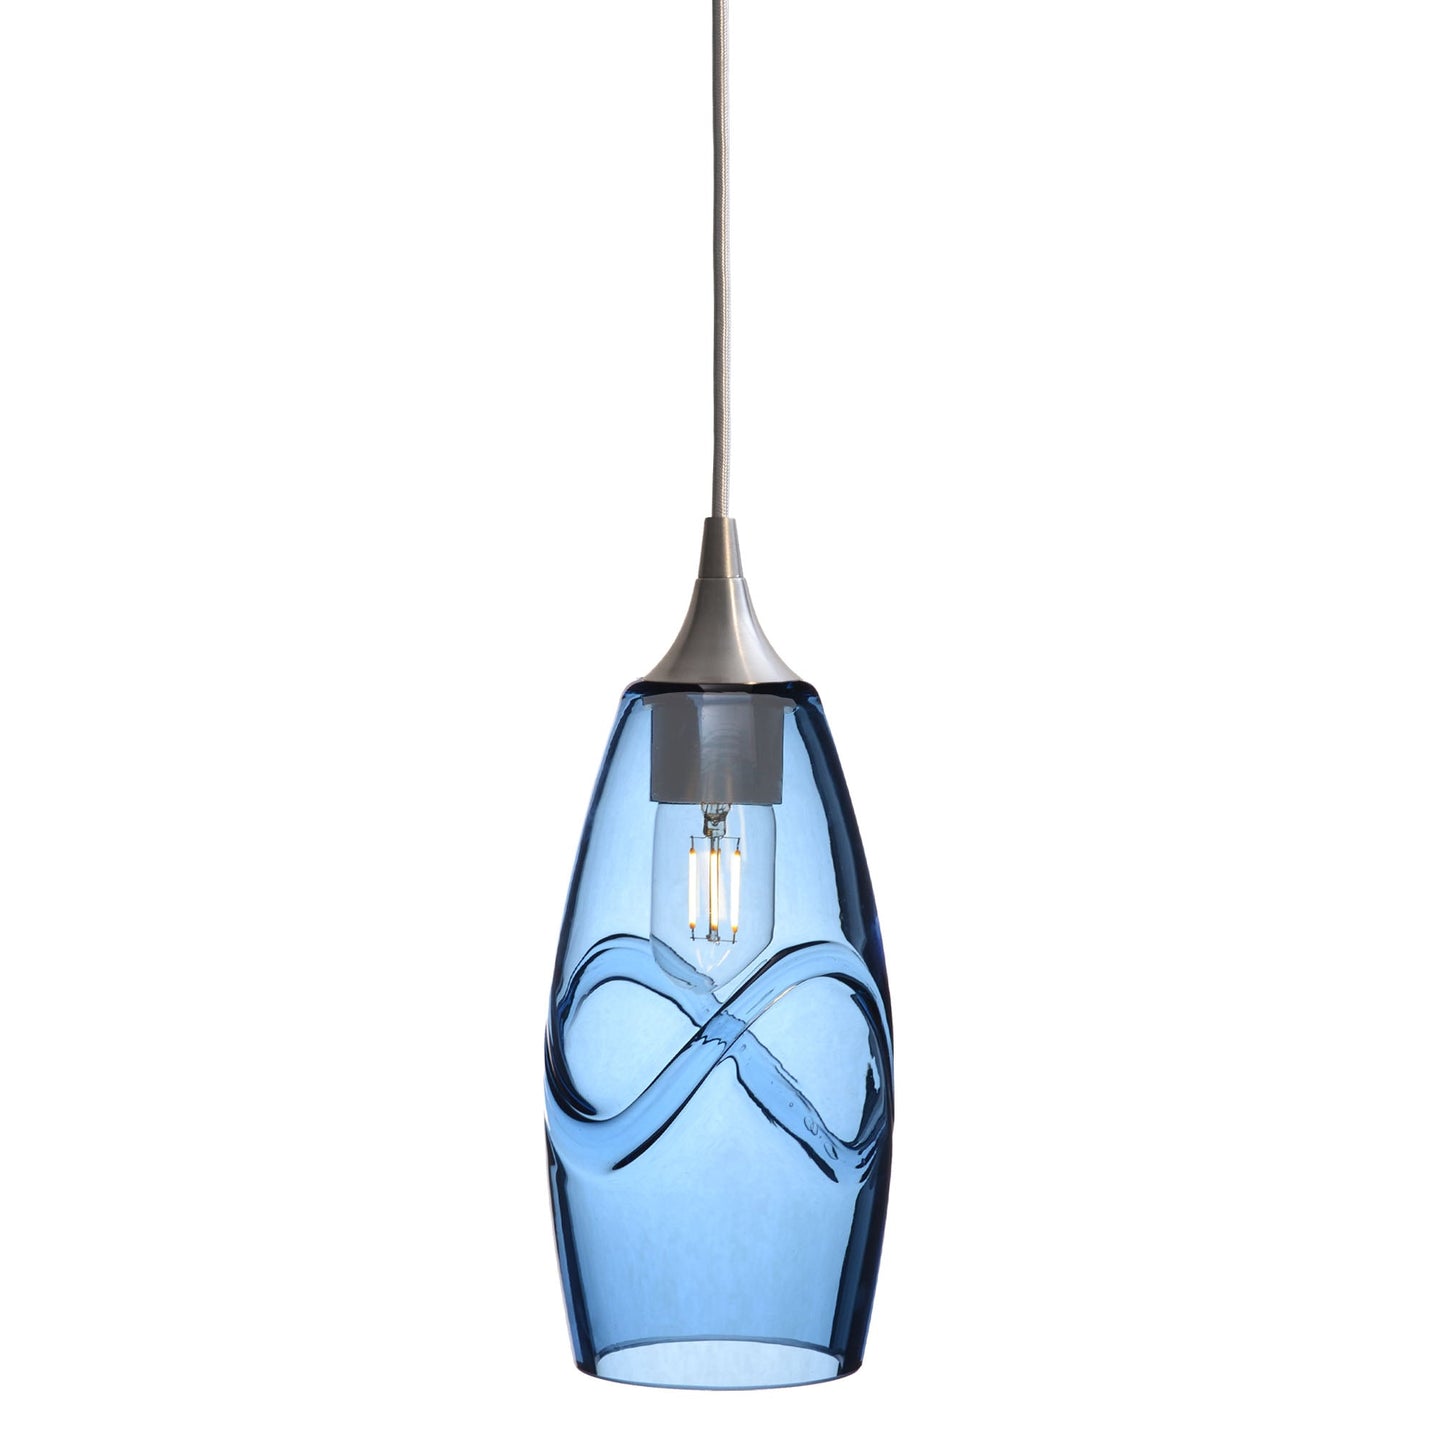 147 Swell: Single Pendant Light-Glass-Bicycle Glass Co - Hotshop-Steel Blue-Brushed Nickel-Bicycle Glass Co